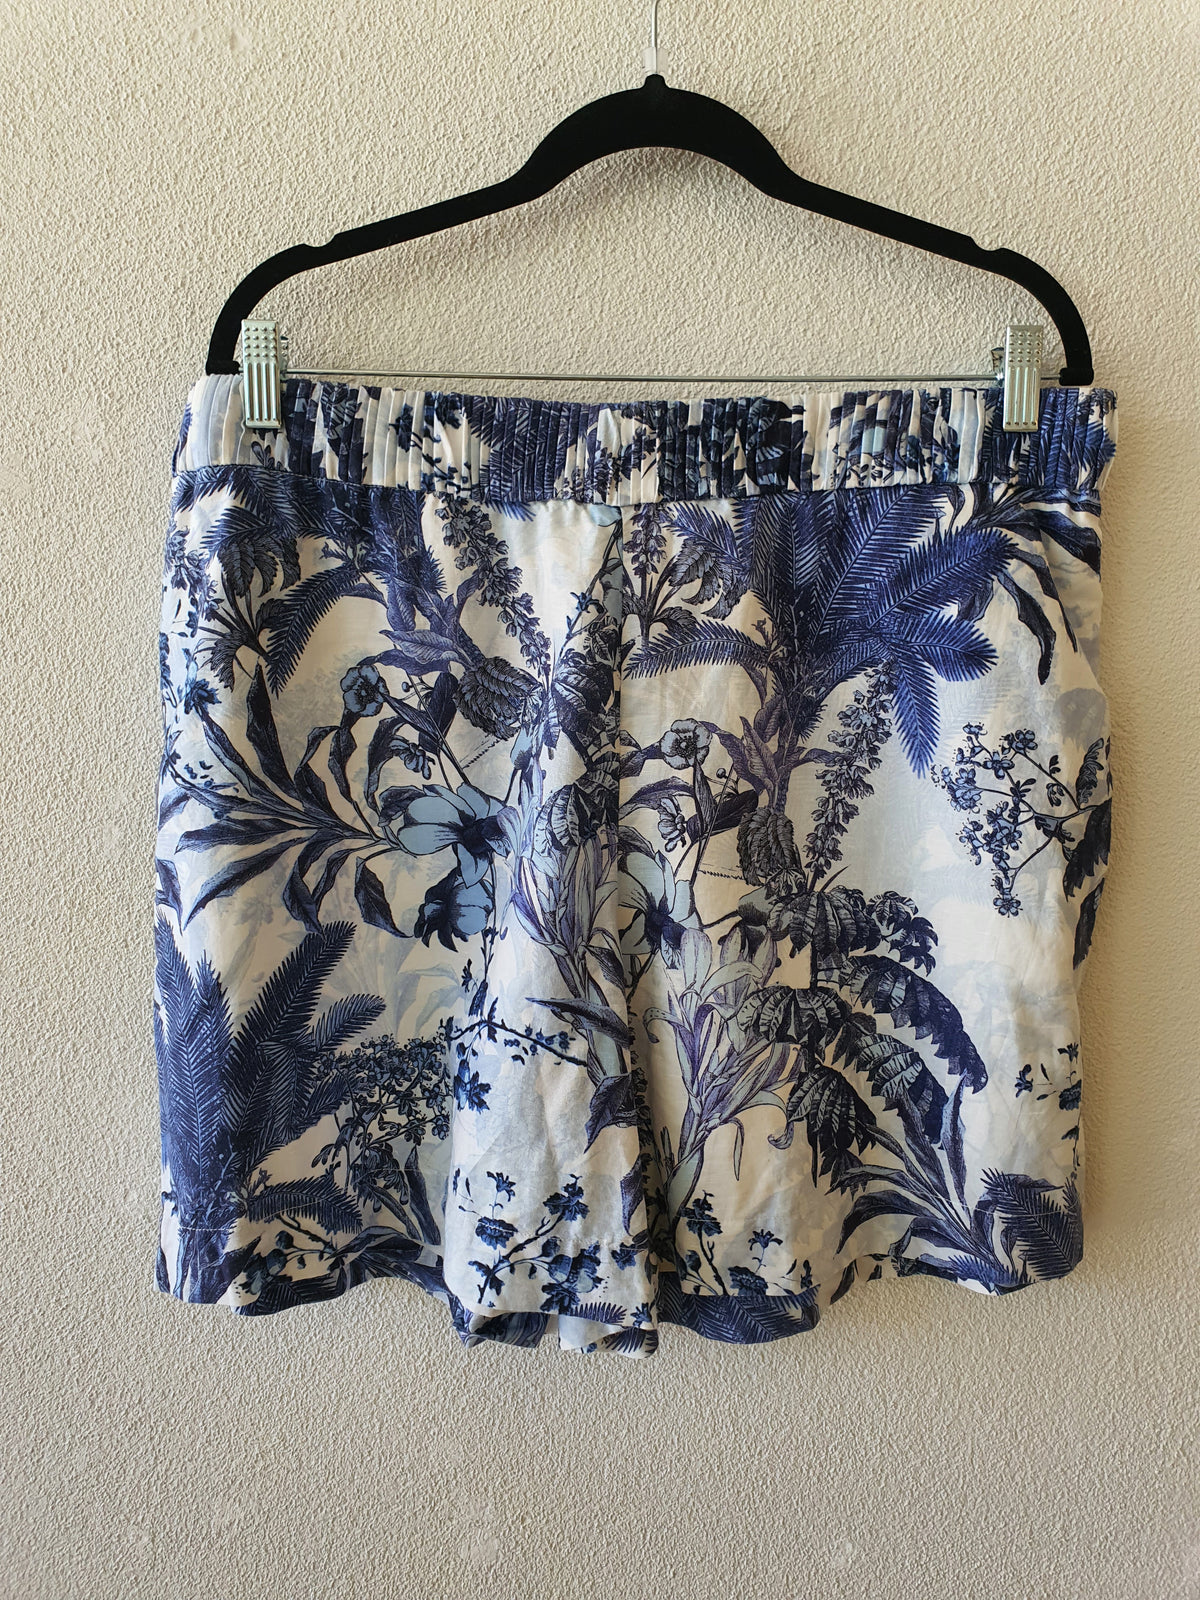 Country Road Linen/cotton tropical shorts 14